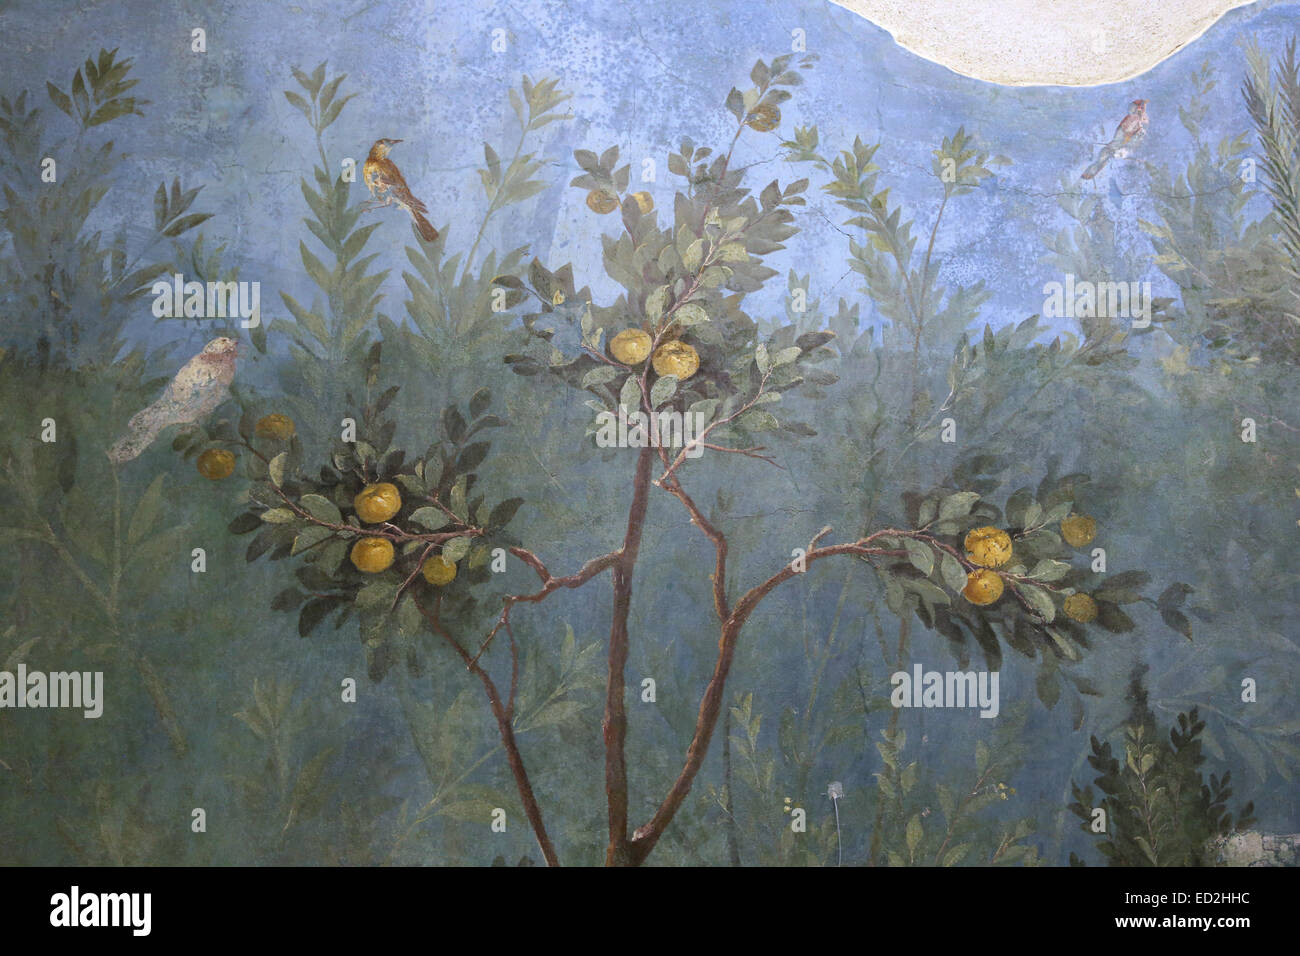 Italy. Rome. Villa of Livia. Painted Garden, removed from the triclinium (dining room) in the Villa of Livia Drusilla. Stock Photo